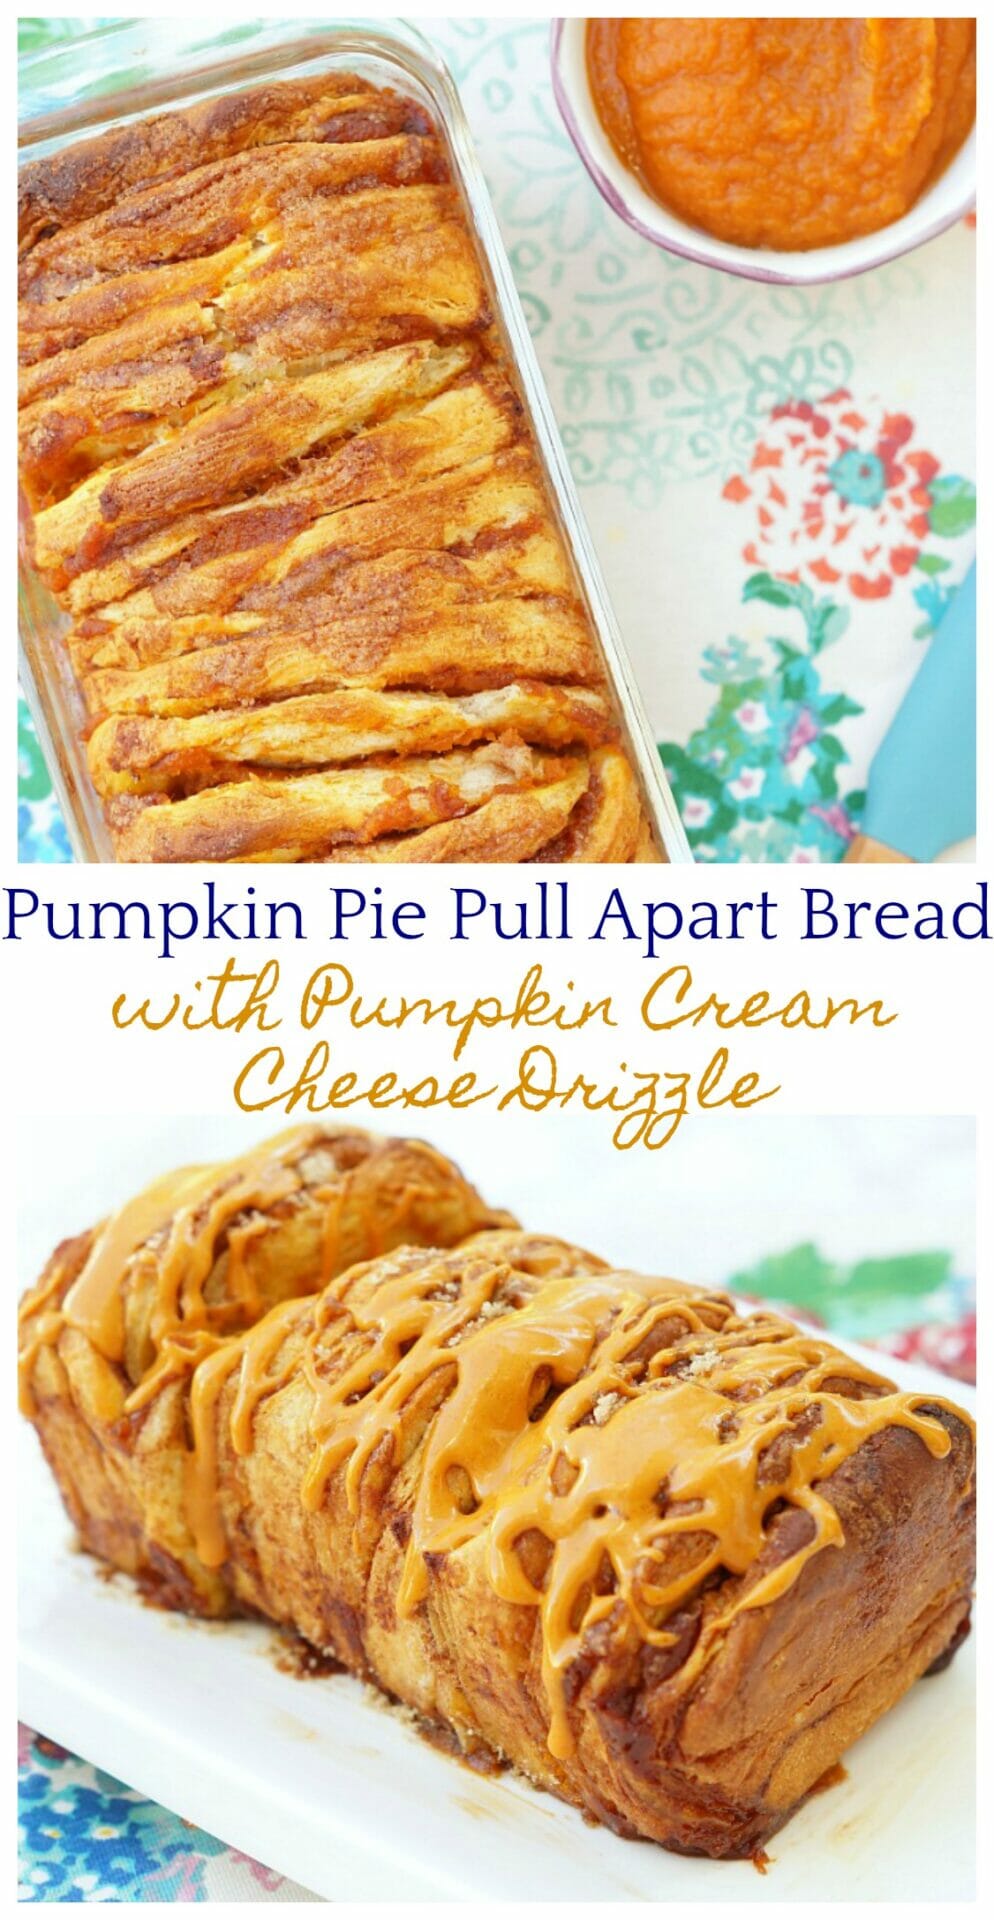 Pumpkin Pie Pull Apart Bread with Pumpkin Cream Cheese Drizzle, the most delicious bread for Thanksgiving morning!